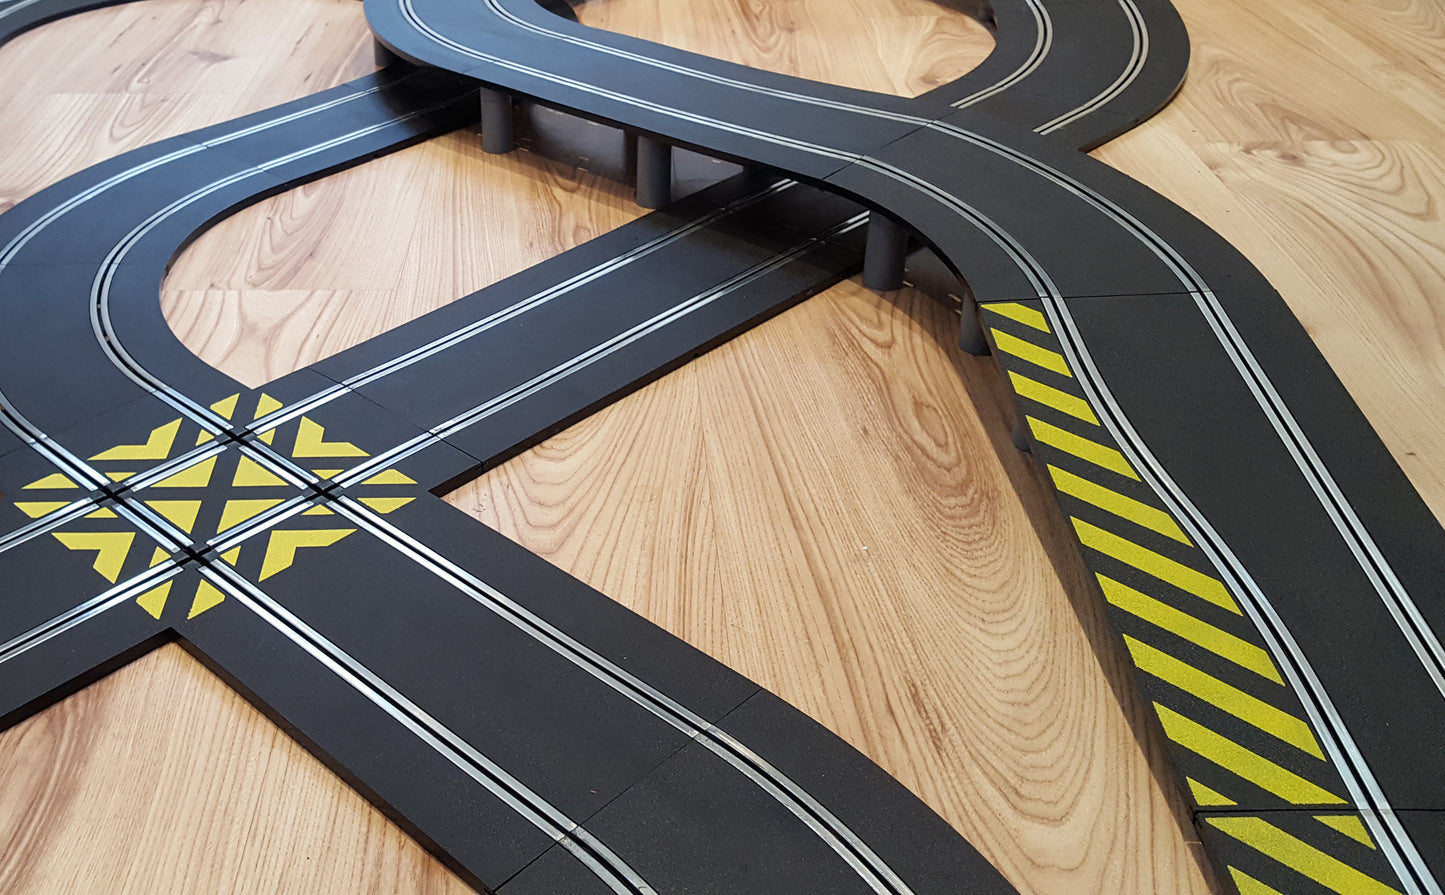 Scalextric Sport 1:32 Track Set - Double Figure-Of-Eight Layout DIGITAL